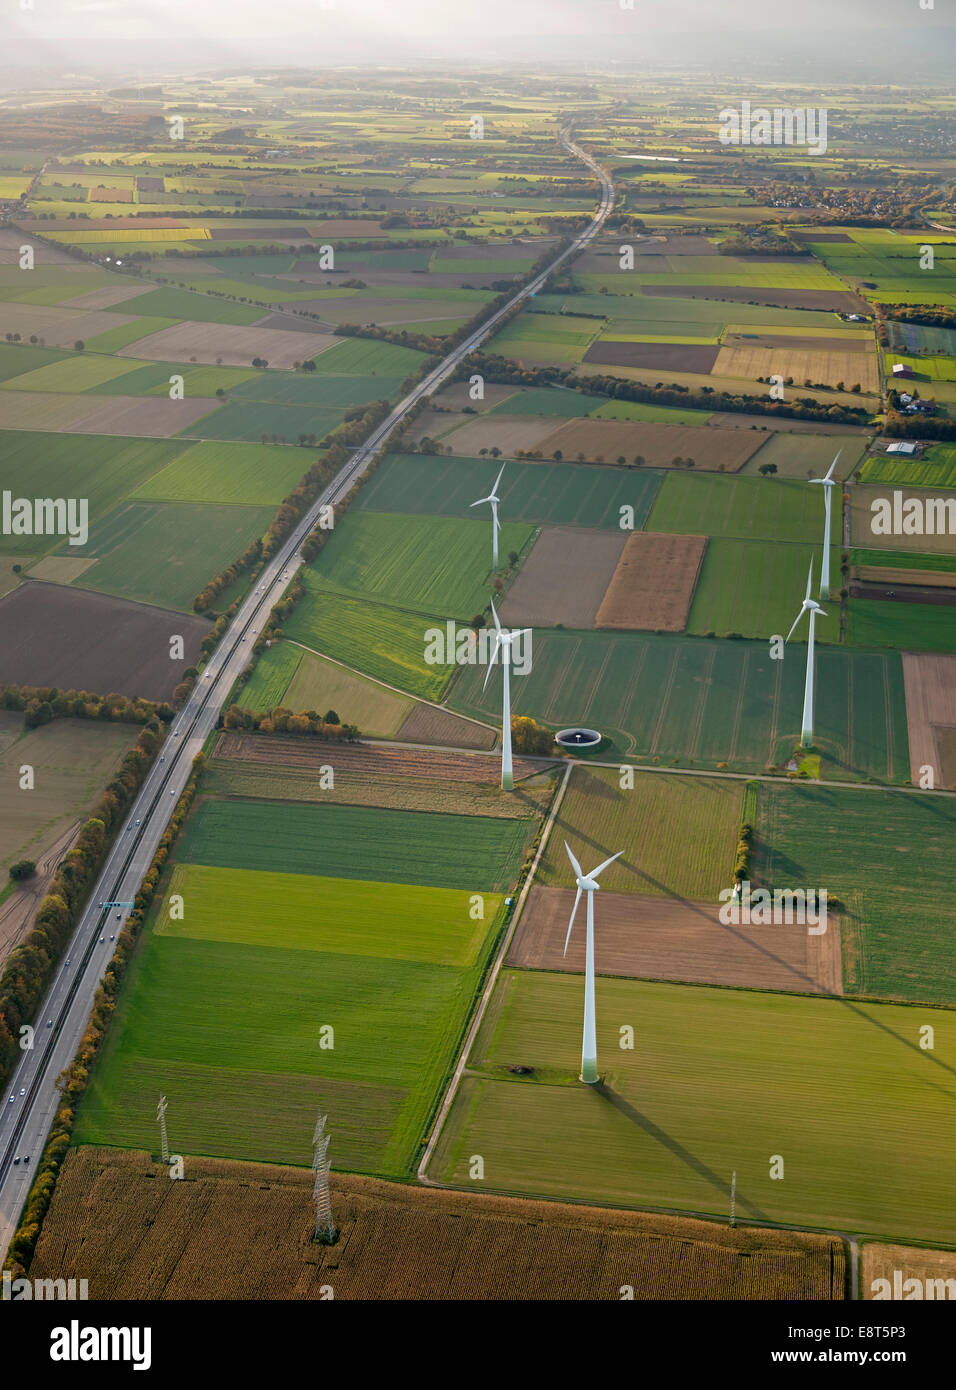 Aerial view, cultivated landscape with wind turbines, near Ense, North Rhine-Westphalia, Germany Stock Photo